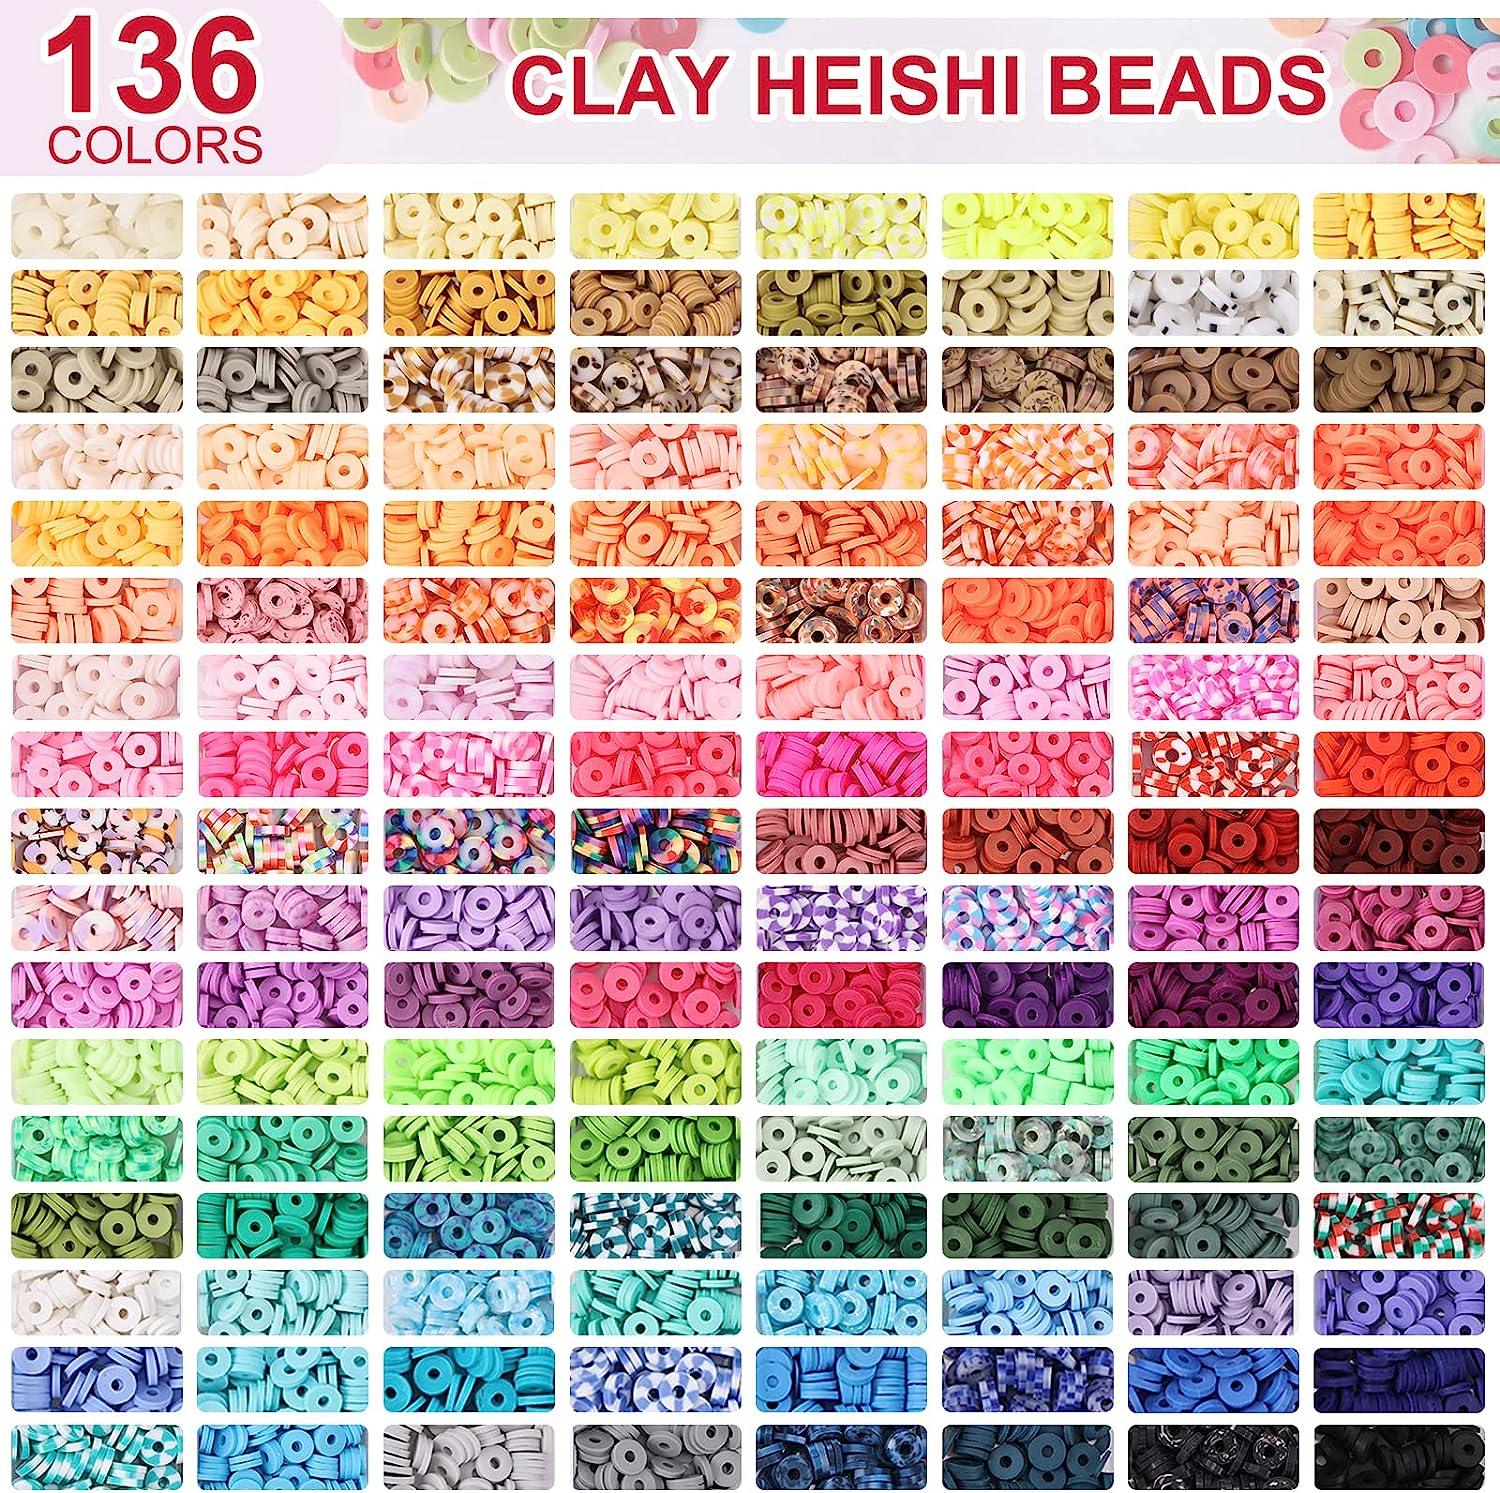 3600 Pcs Rose Red Clay Beads for Bracelets Making, 10 Strands Flat Round Polymer Clay Beads 6mm Spacer Heishi Beads for Jewelry Making Earring